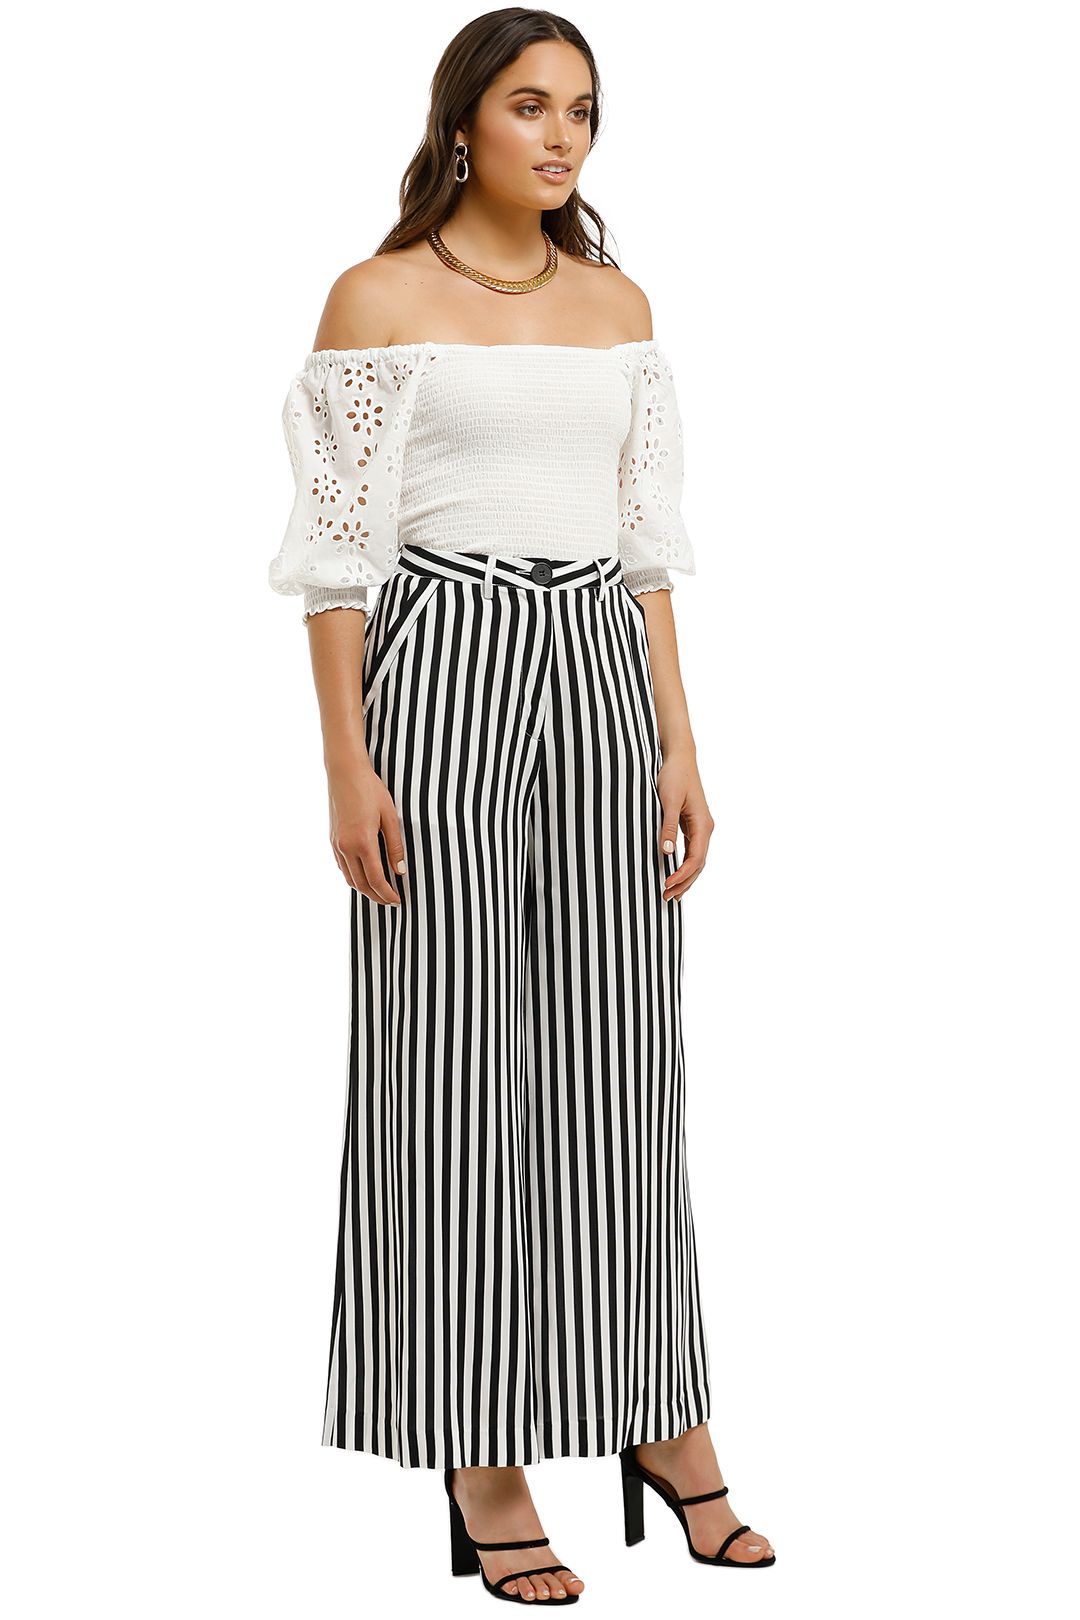 Cooper-By-Trelise-Cooper-Down-The-Line-Pant-Black-White-Stripe-Side